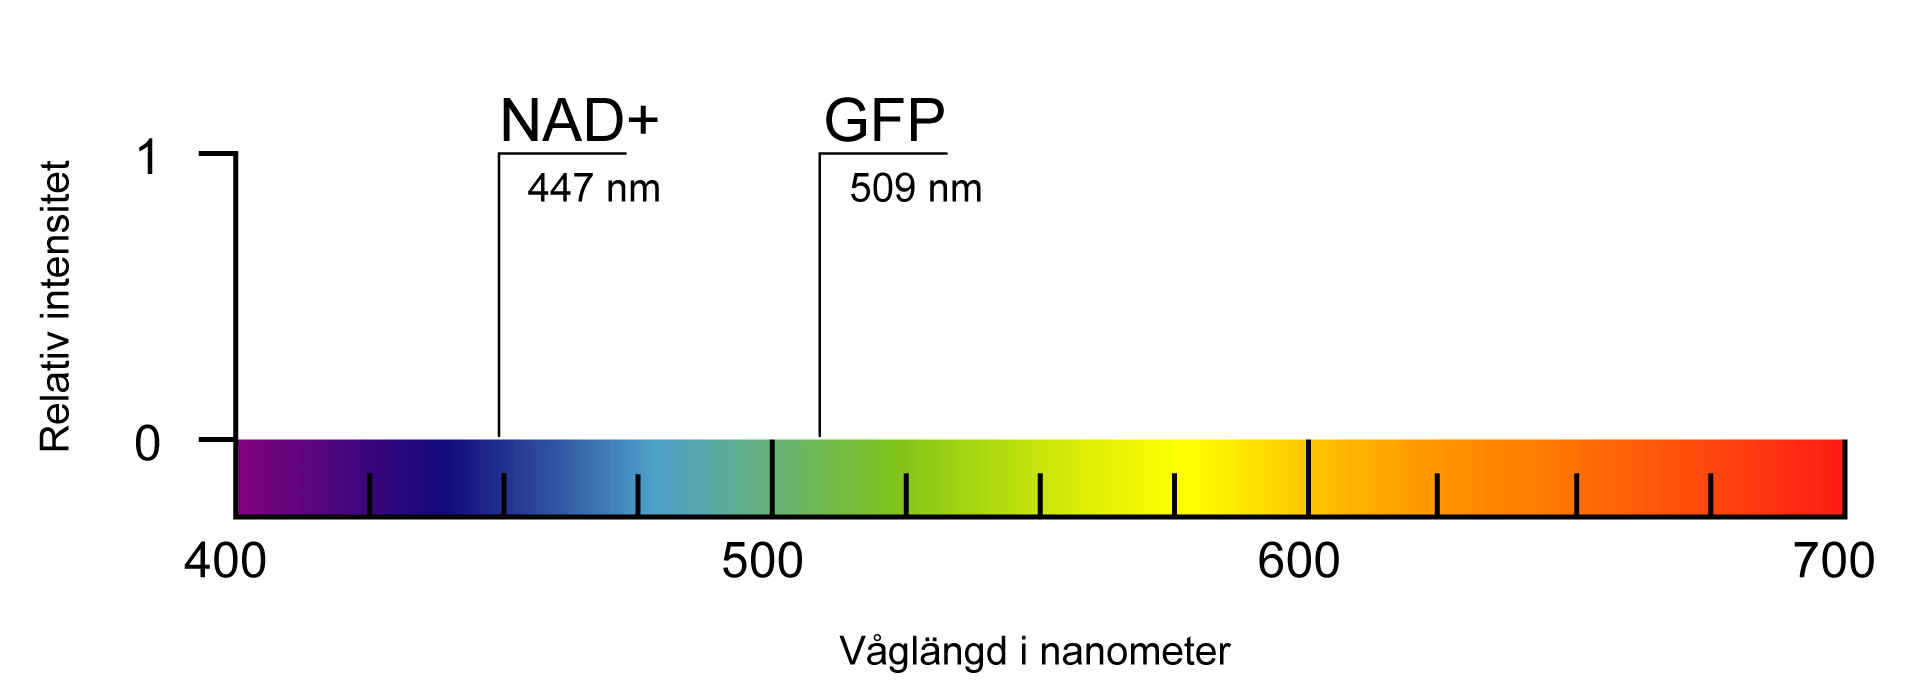 Colour spectrum showing emission peaks for NAD+ and GFP